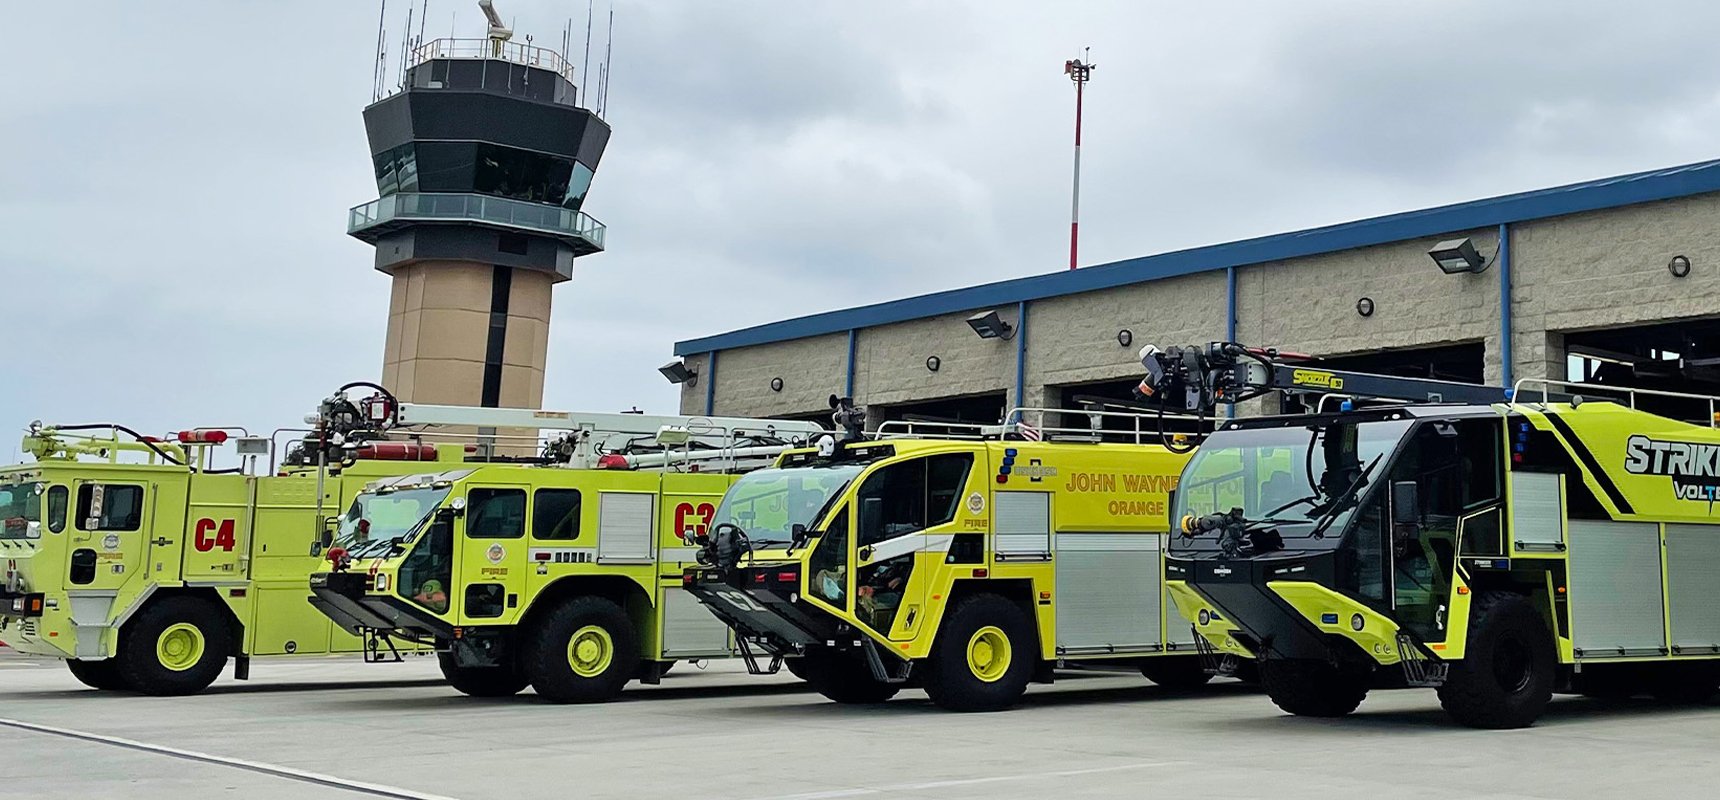 Four neon green trucks, designed for the aircraft rescue and firefighting (ARFF) industry, lined up in front of an airport control tower